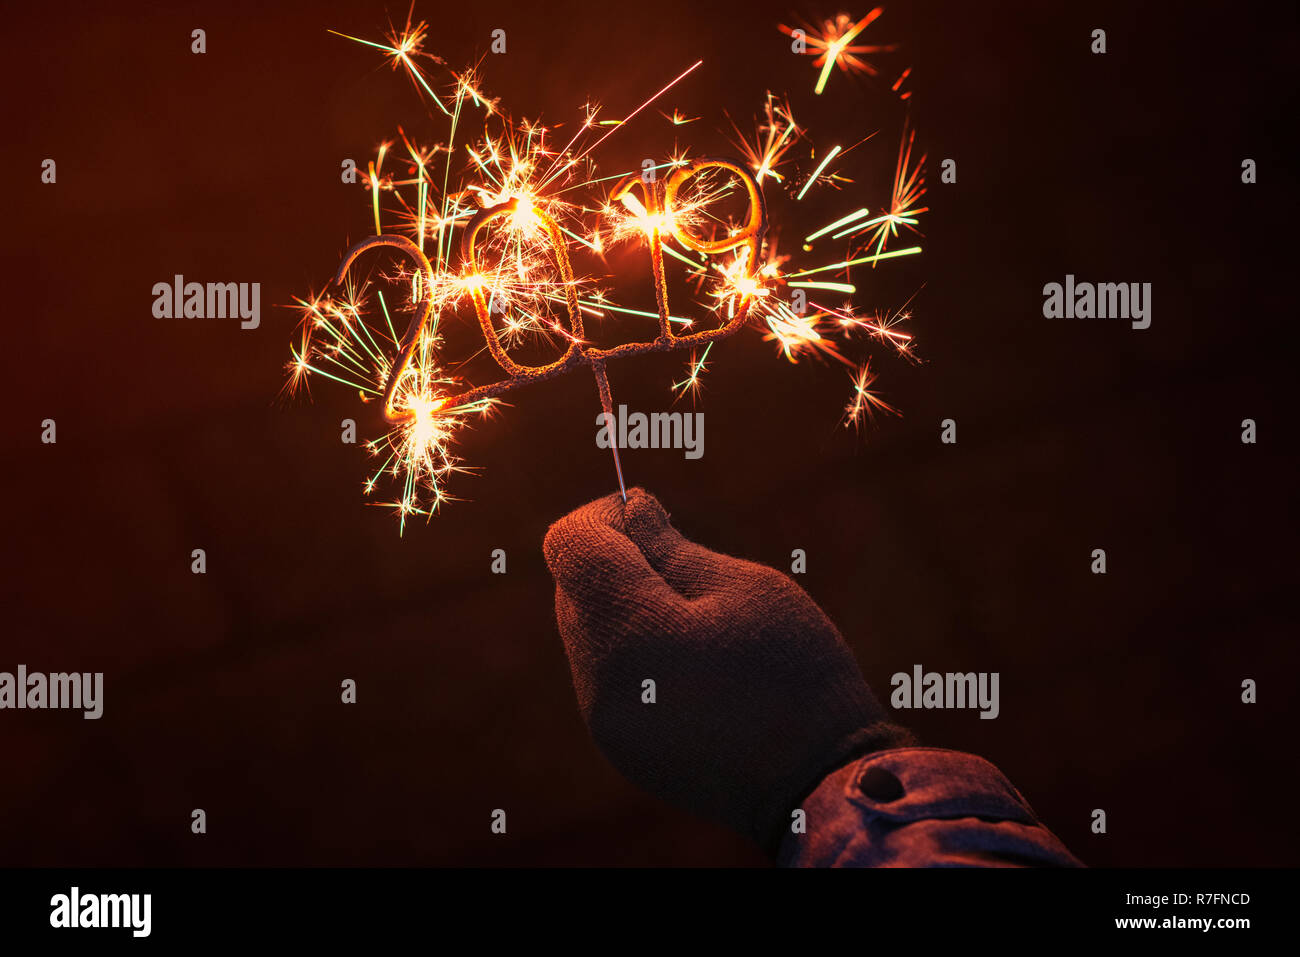 Human hand with glove holding an igniting 2019 Shaped Sparkler, outdoors at night Stock Photo